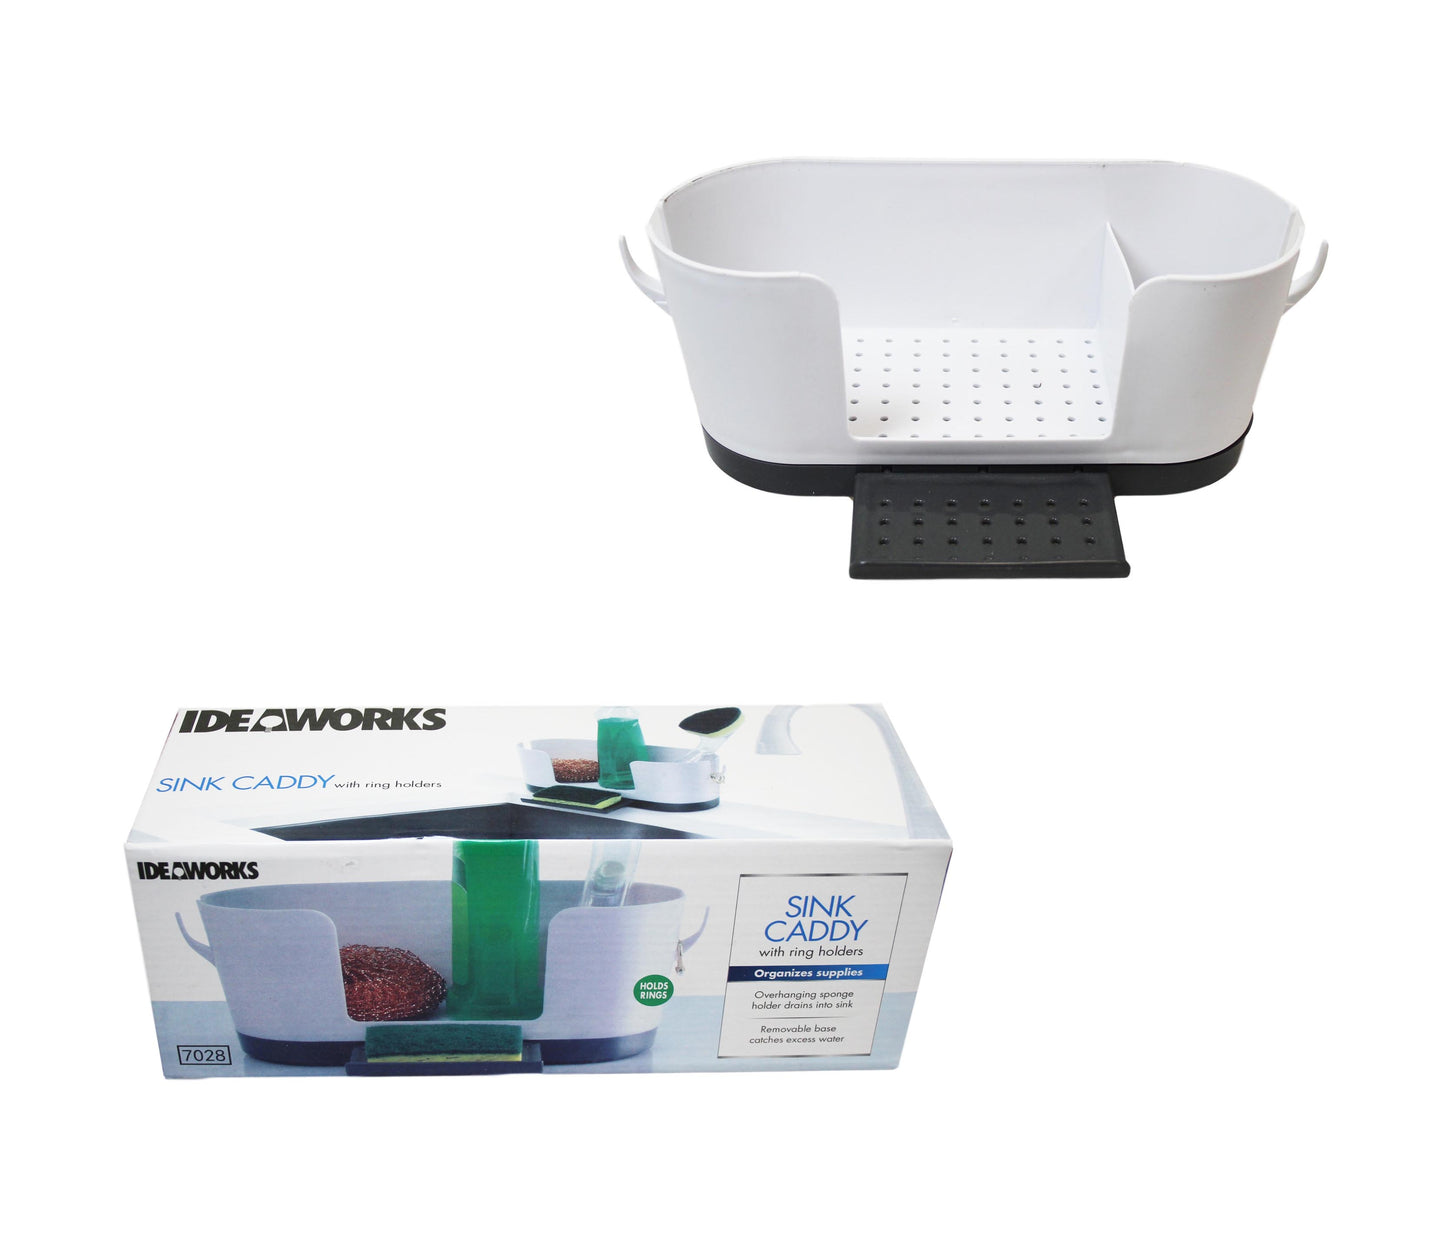 Plastic Sink Candy With Ring Holders Removable Base With 2 Hanging Handles 8912 (Parcel Rate)